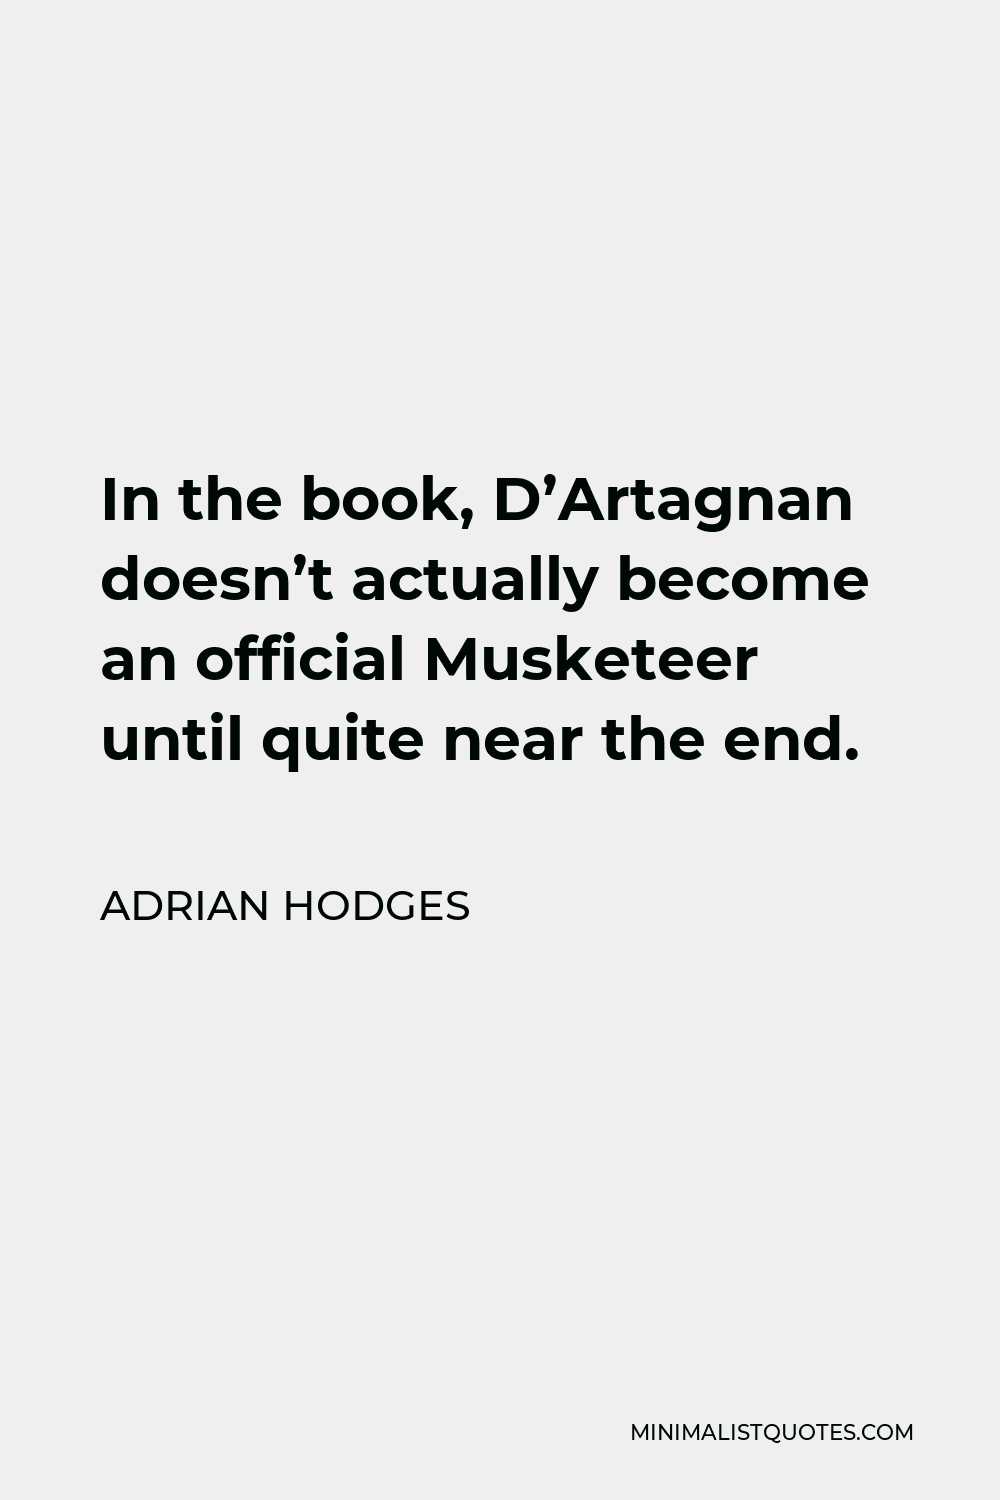 Adrian Hodges Quote - In the book, D’Artagnan doesn’t actually become an official Musketeer until quite near the end.